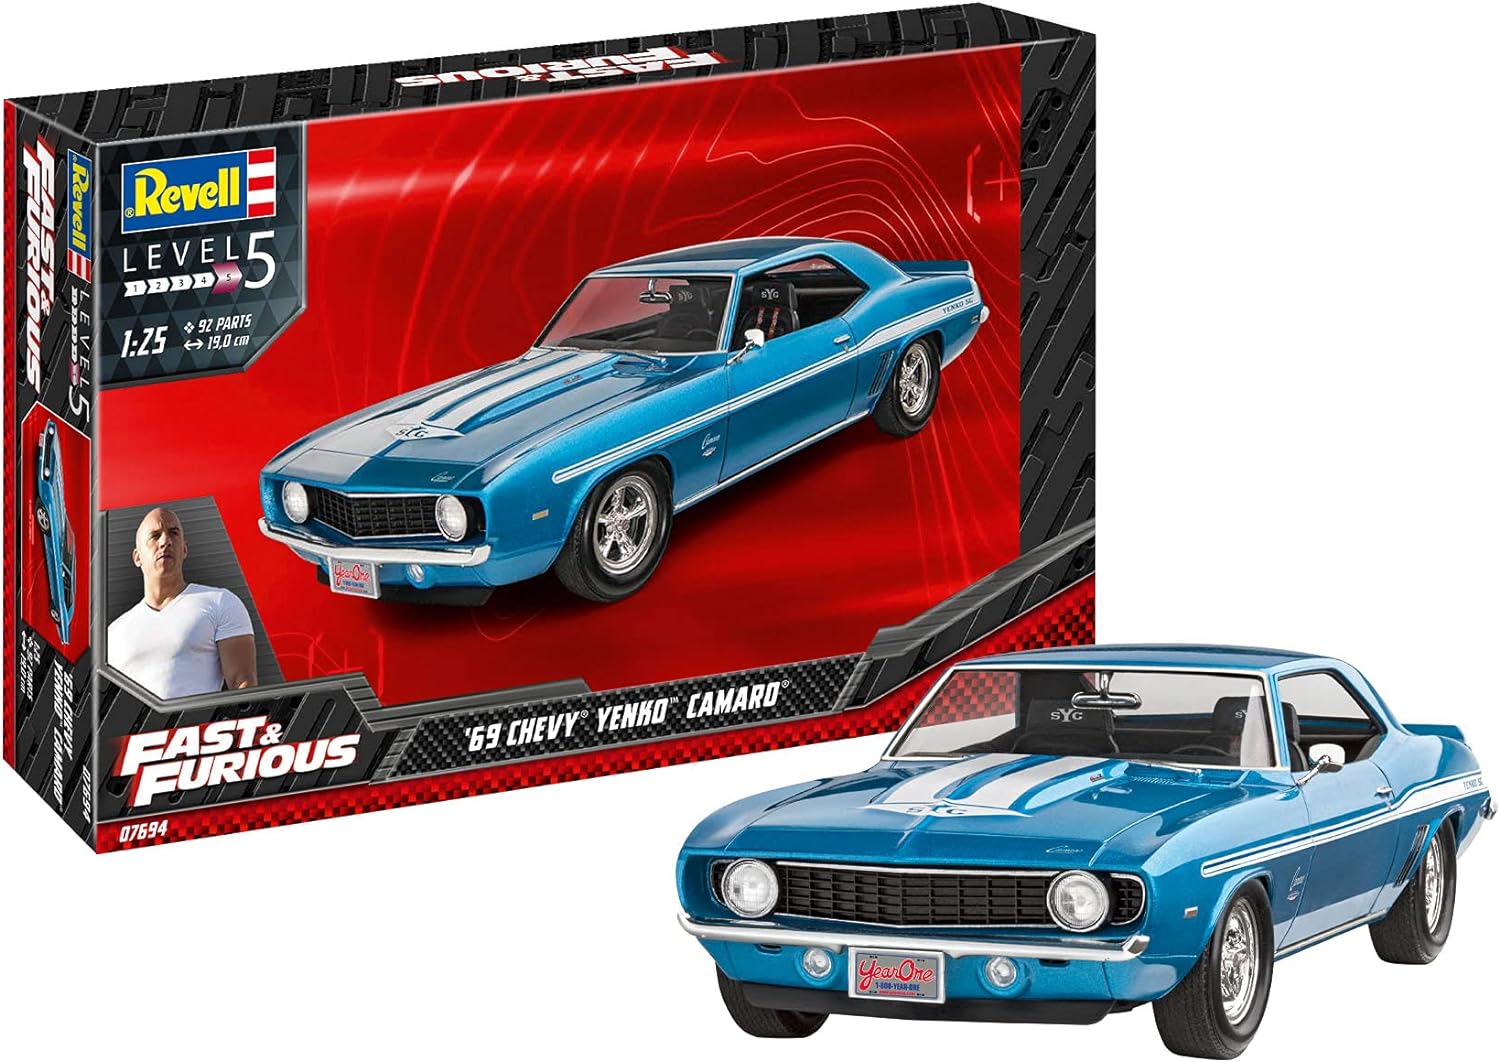 Fast & Furious 1969 Chevy Camaro 1:25 Scale Kit